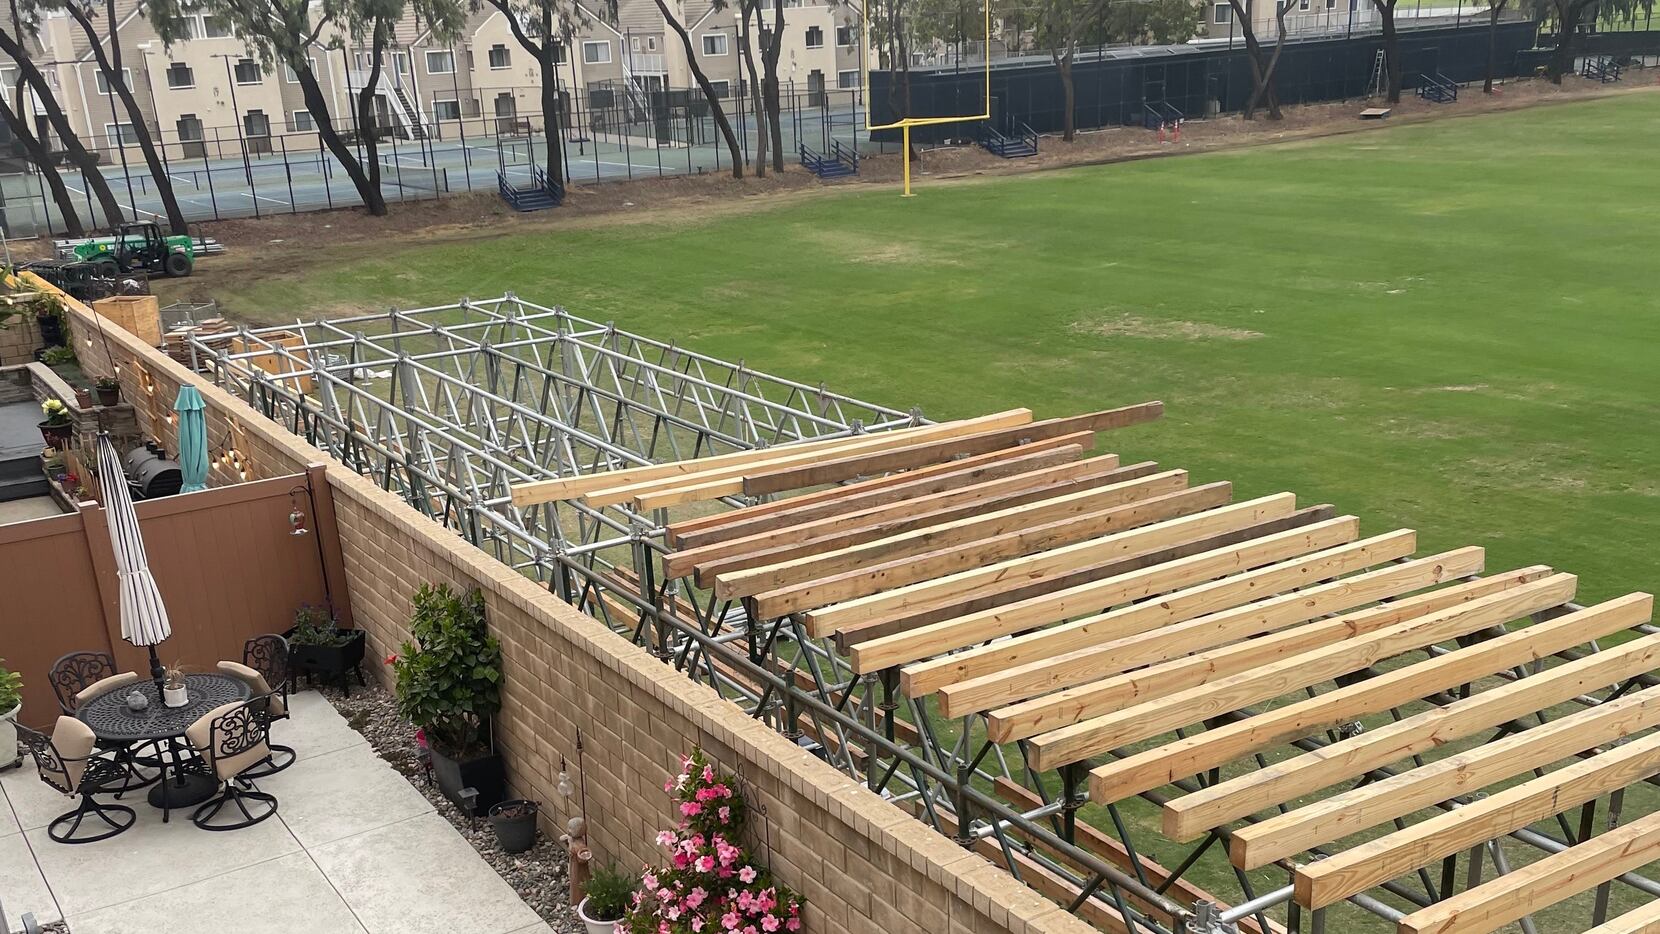 Oxnard residents told The Dallas Morning News that construction of the tent-like structure...